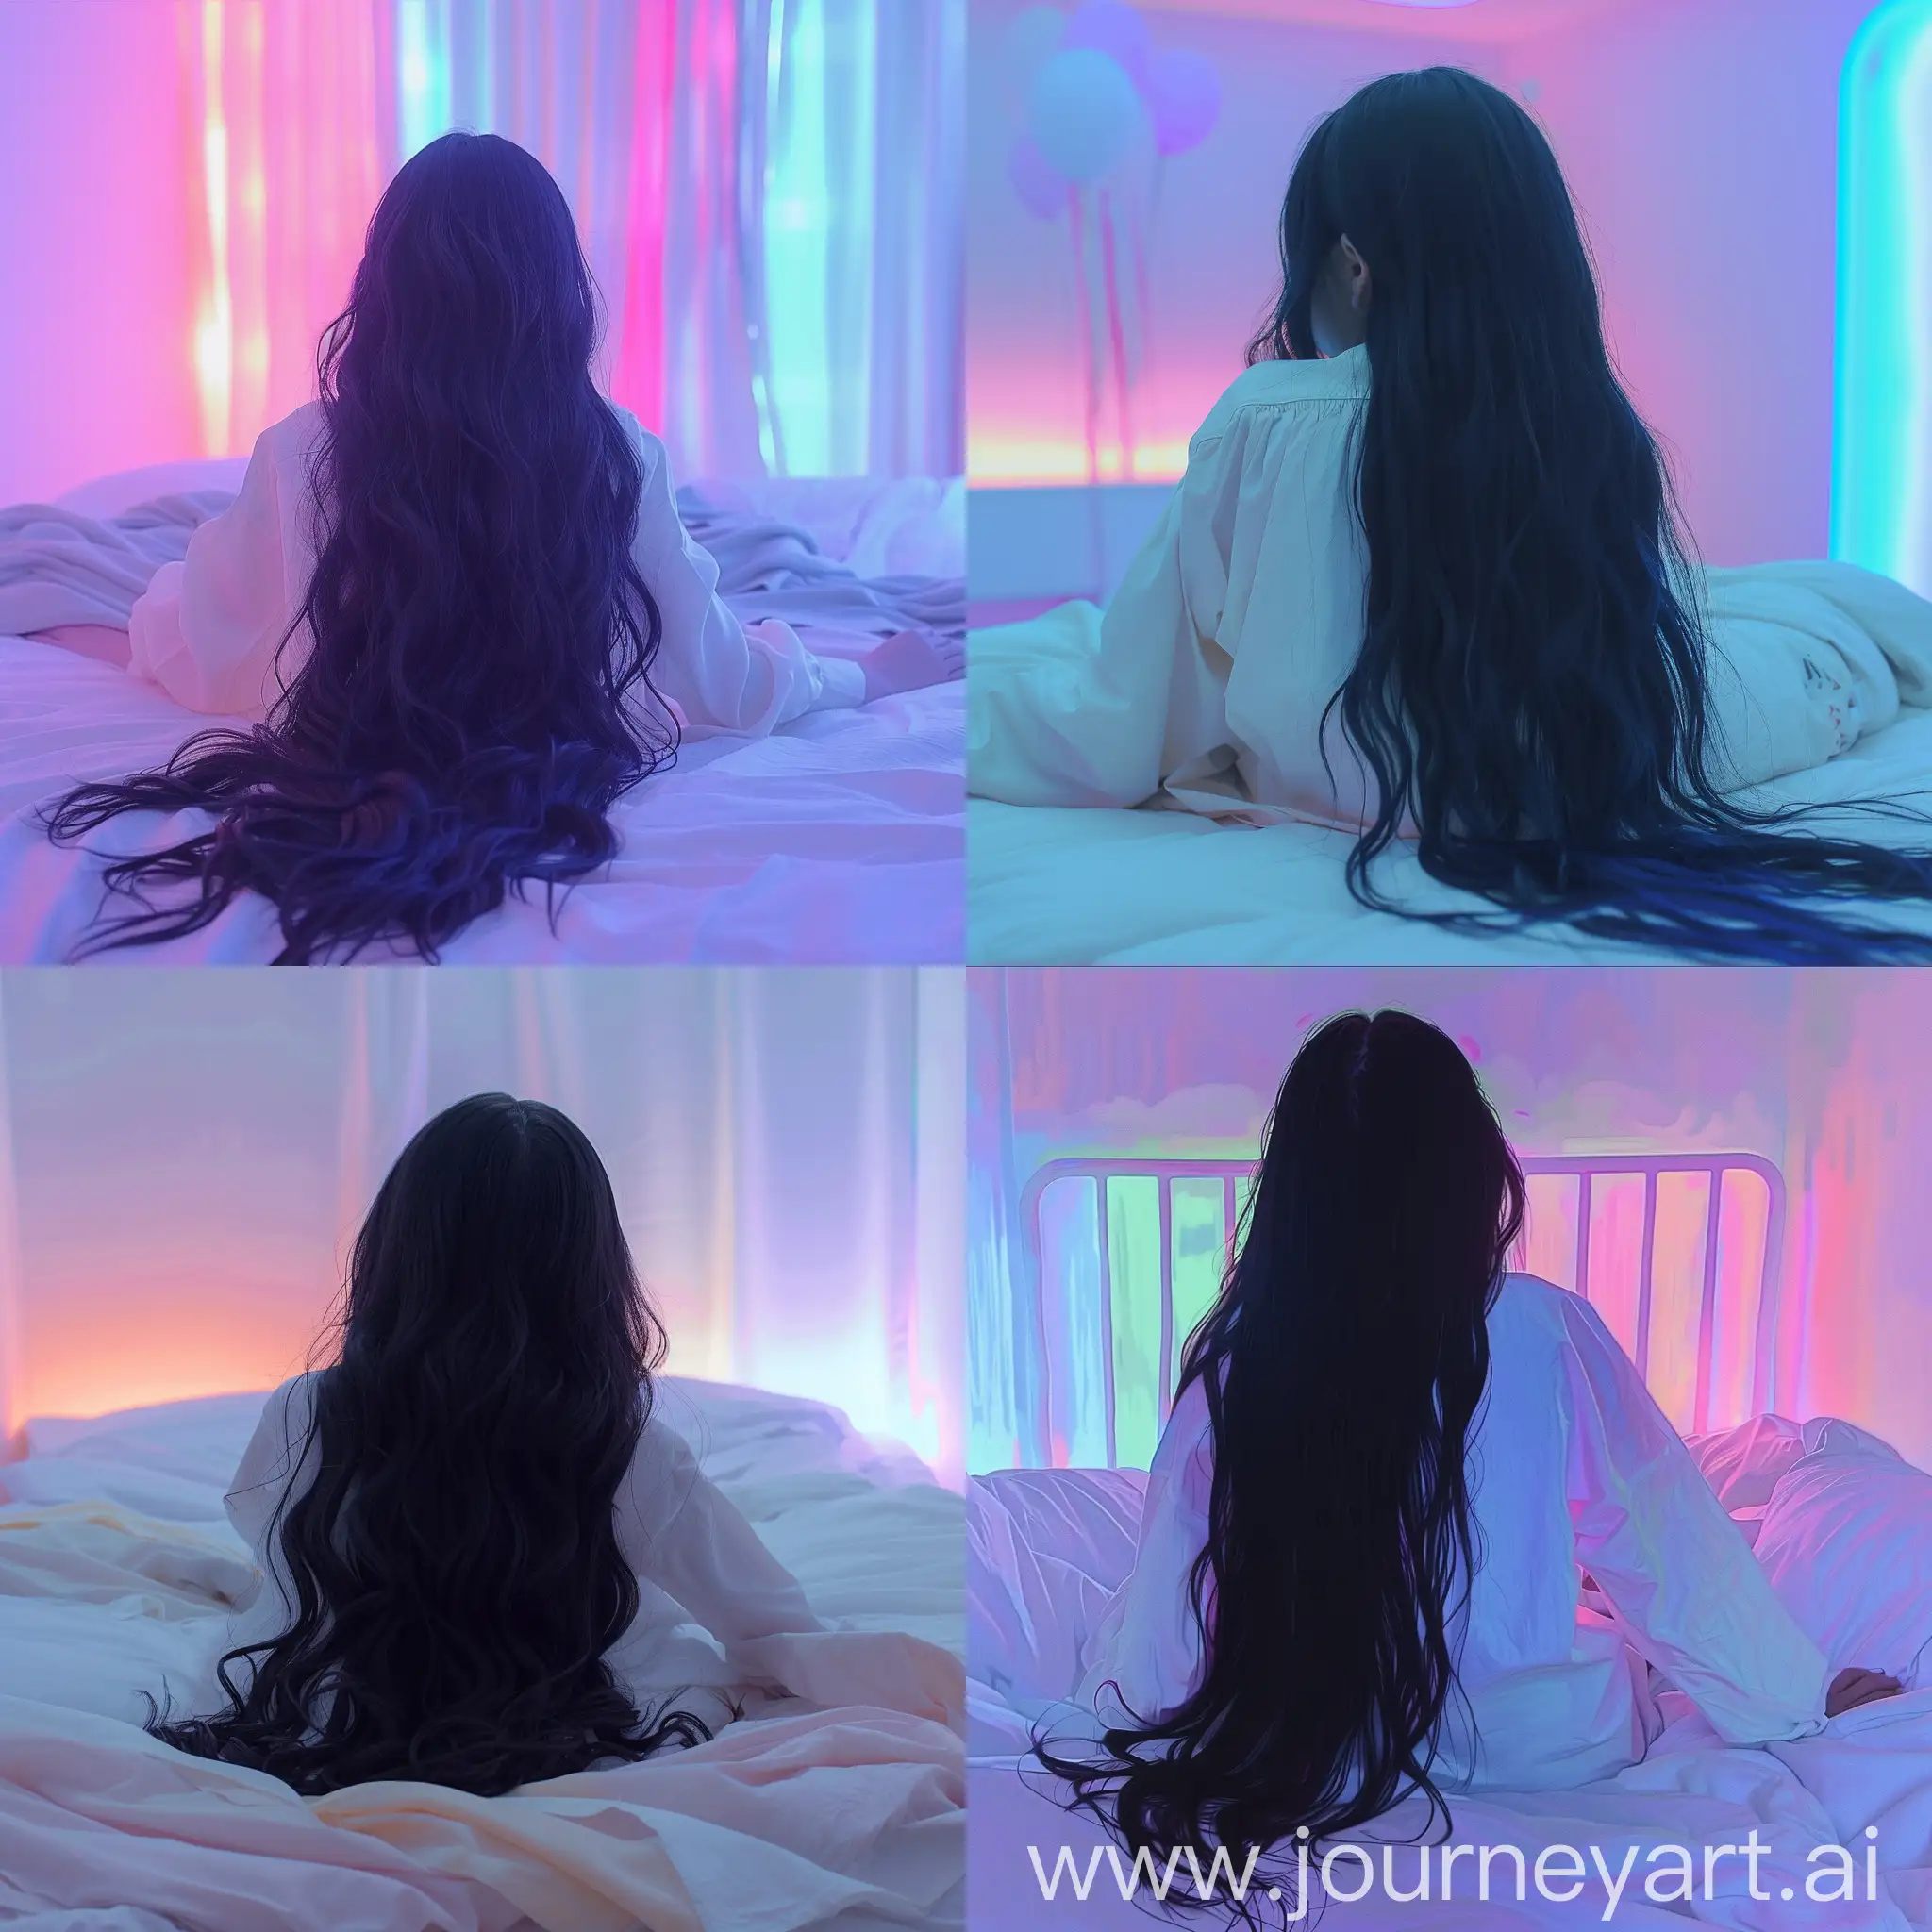 Aesthetic instagram picture real person, girl with long black hair facing away laying in bed, pastel lit room 